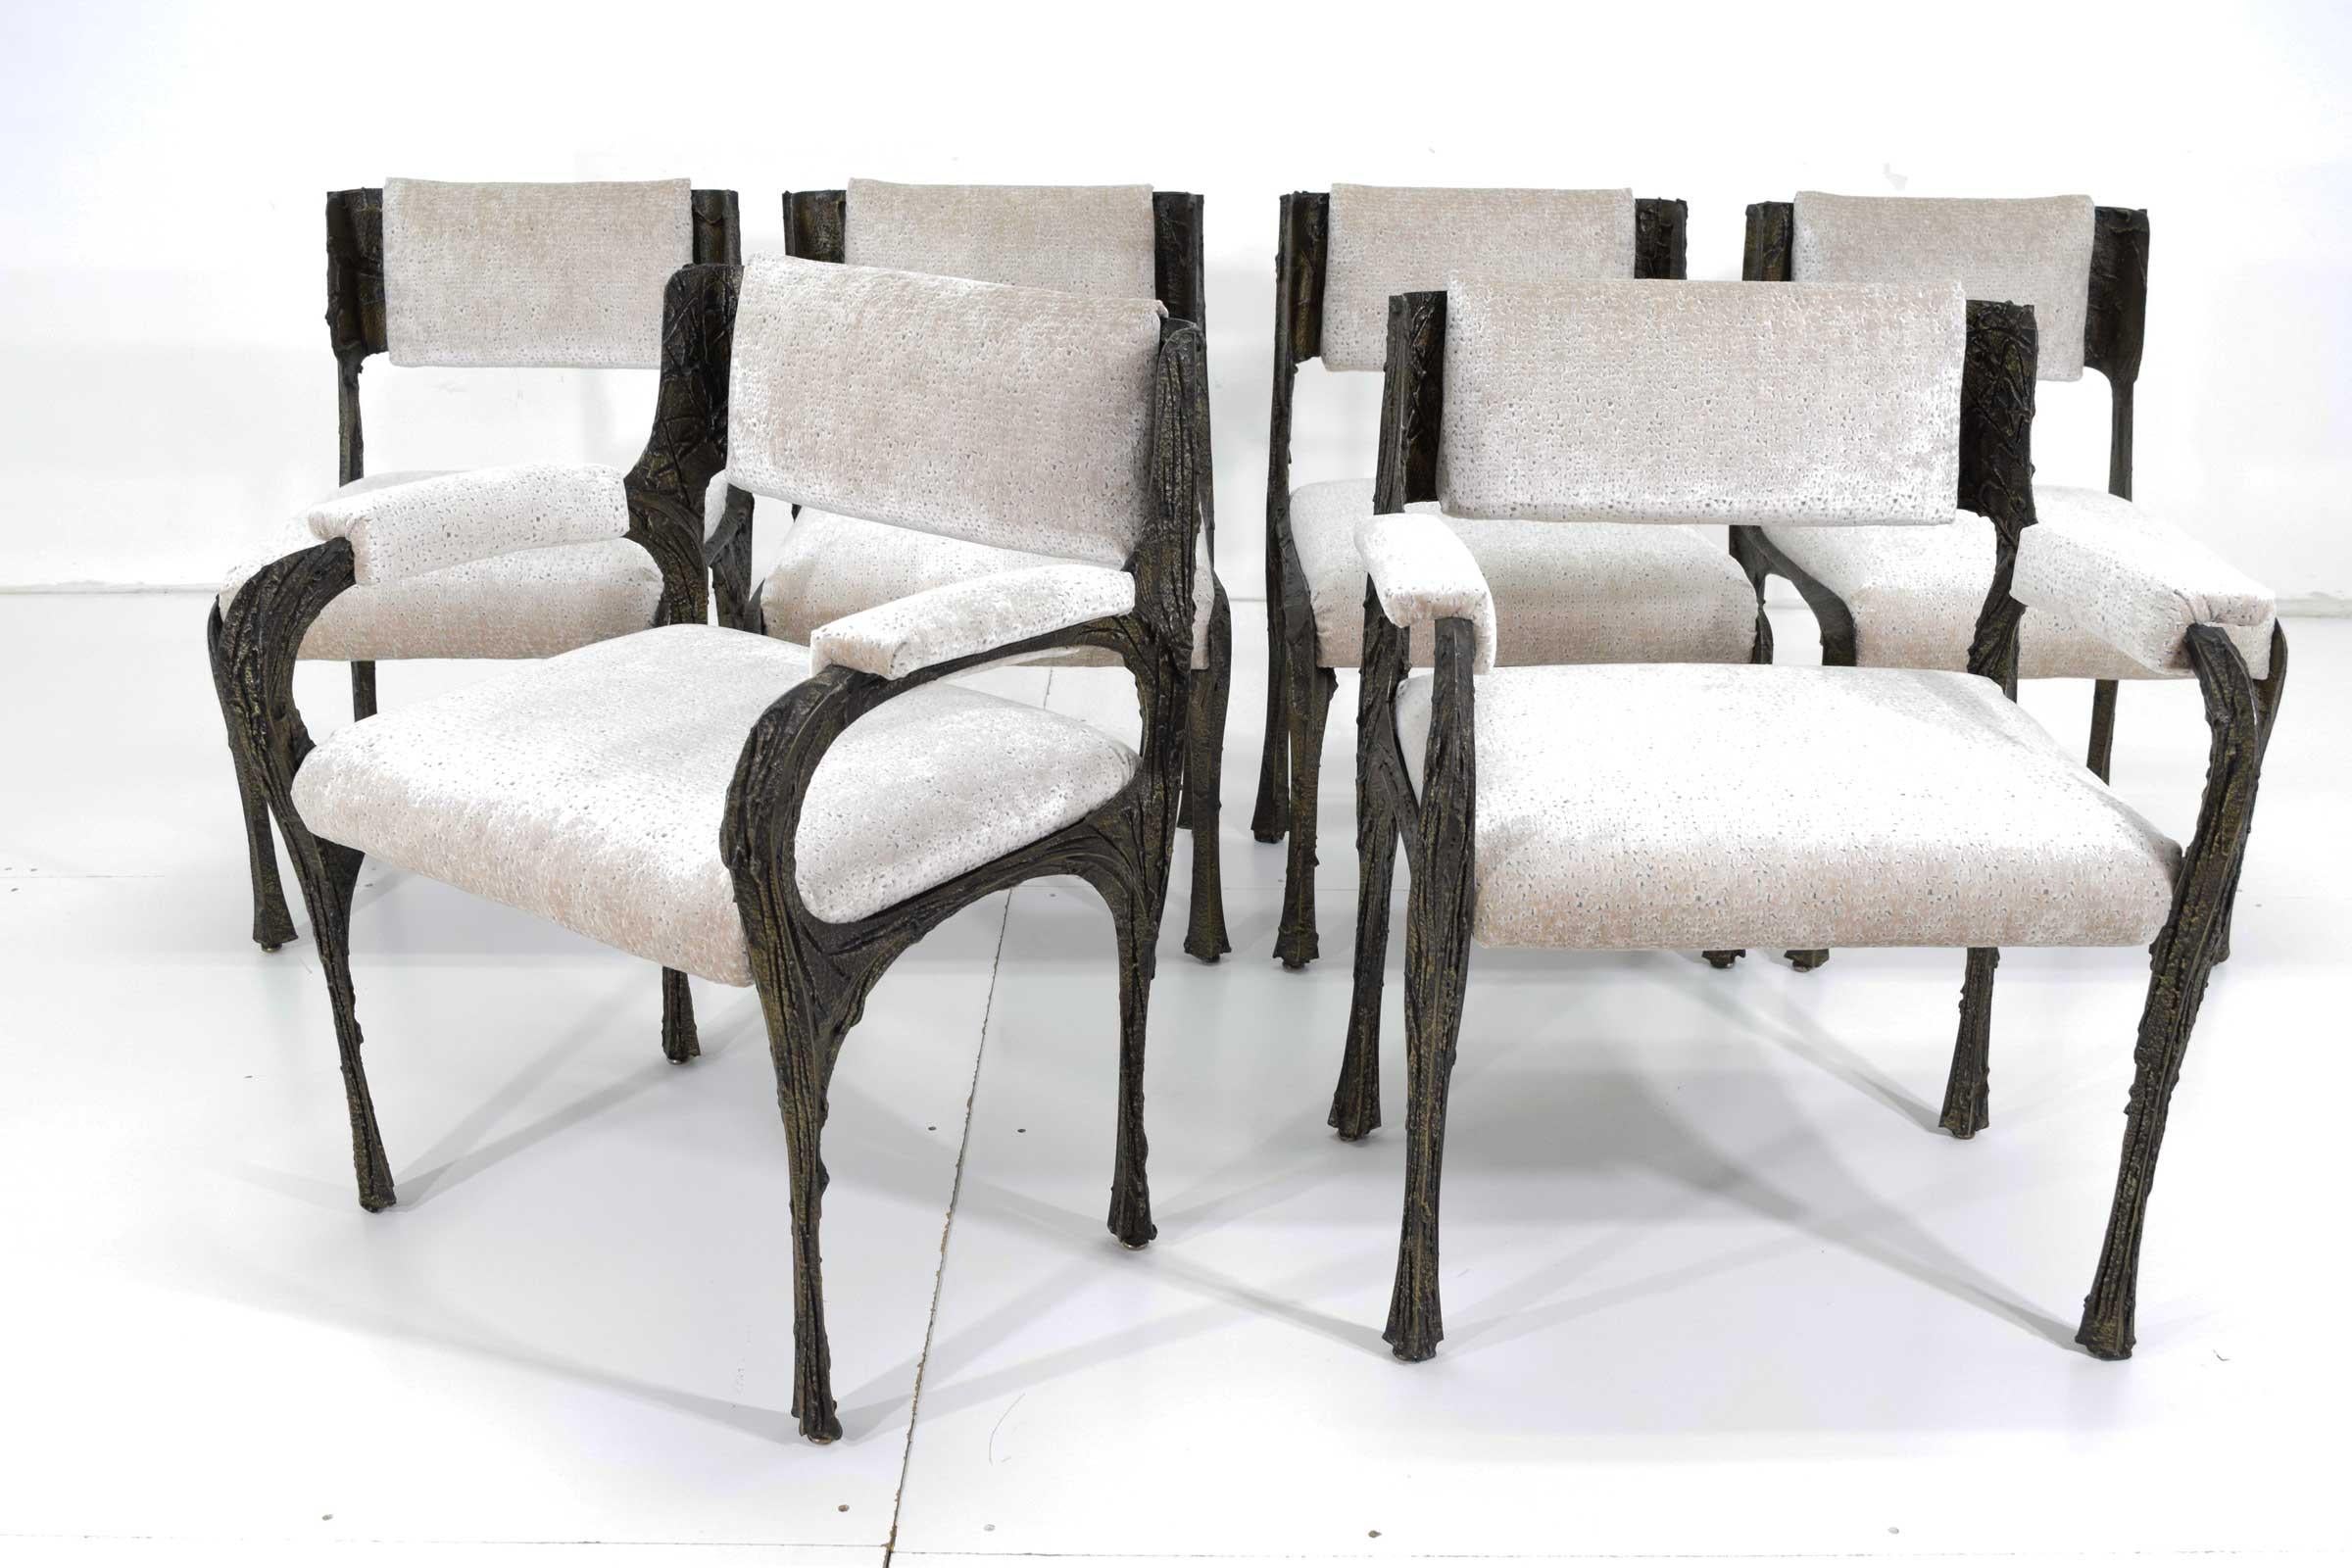 This is a beautiful set of Paul Evans' Brutalist bronze and resin dining chairs. These were owned by one owner who purchased in 1972 along with the dining table and has taken meticulous care of this set. New upholstery in a rich velvet. The chairs